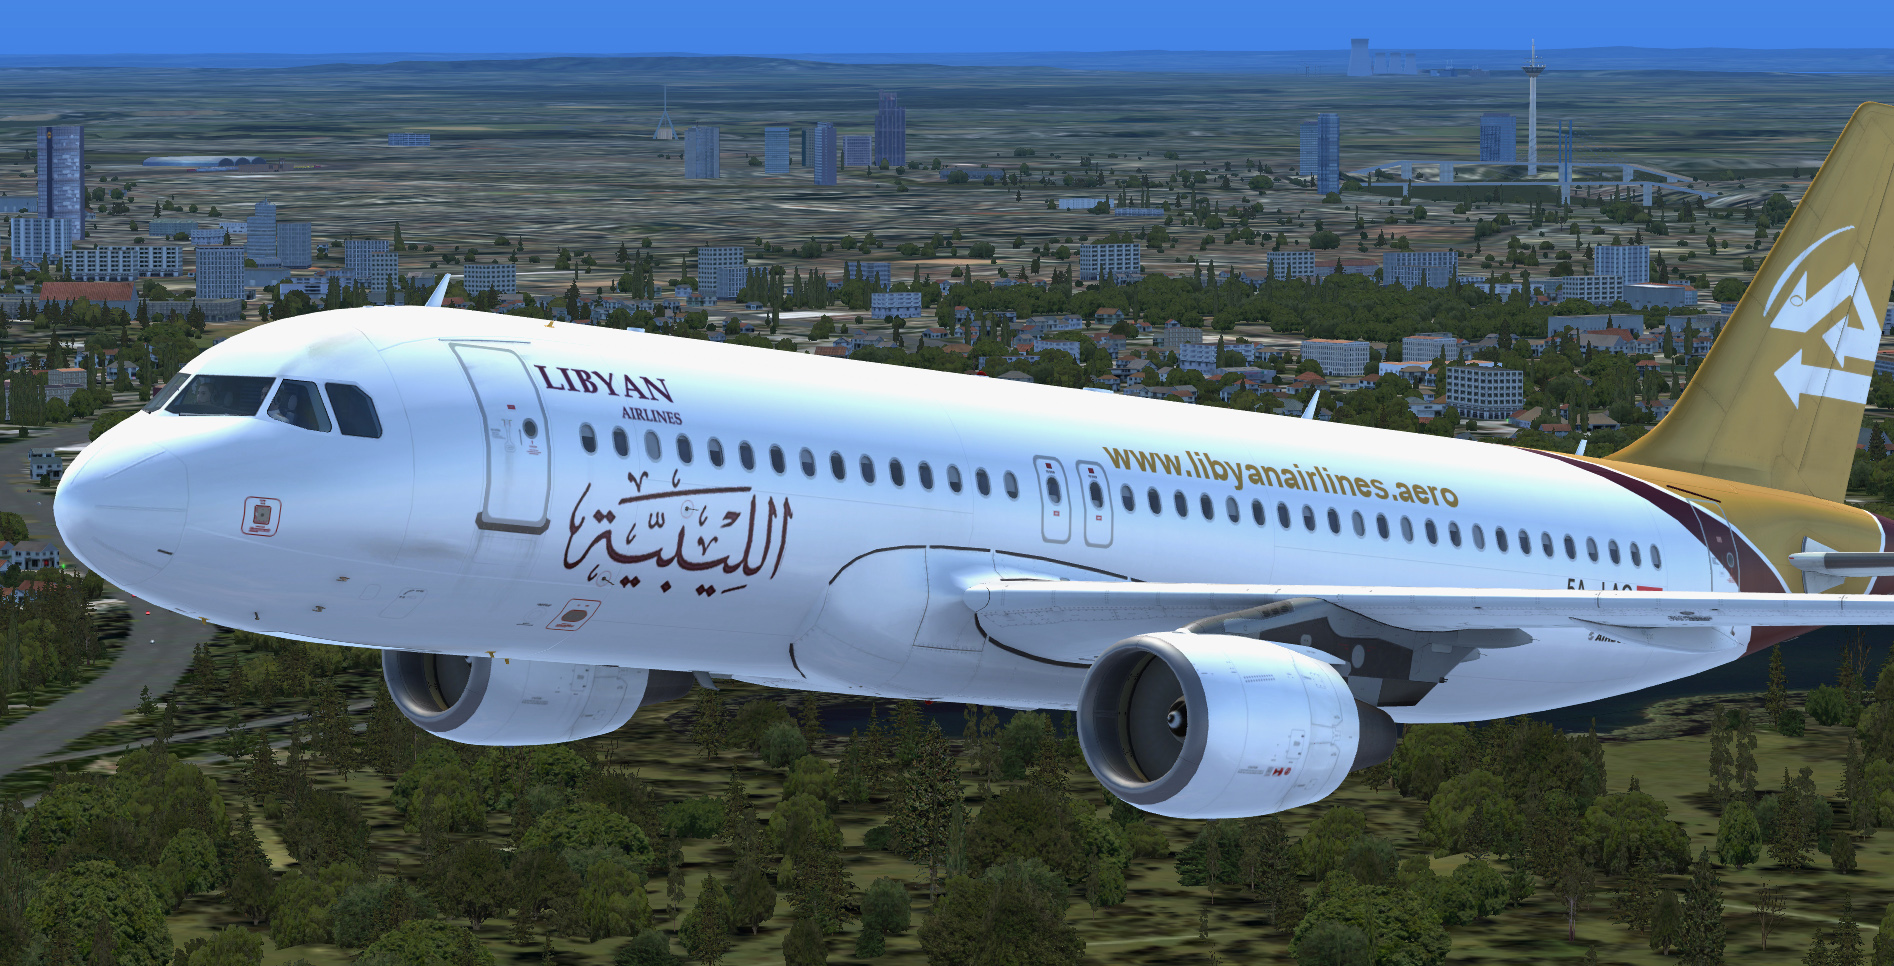 More information about "A320-214 CFM Libyan Airlines"